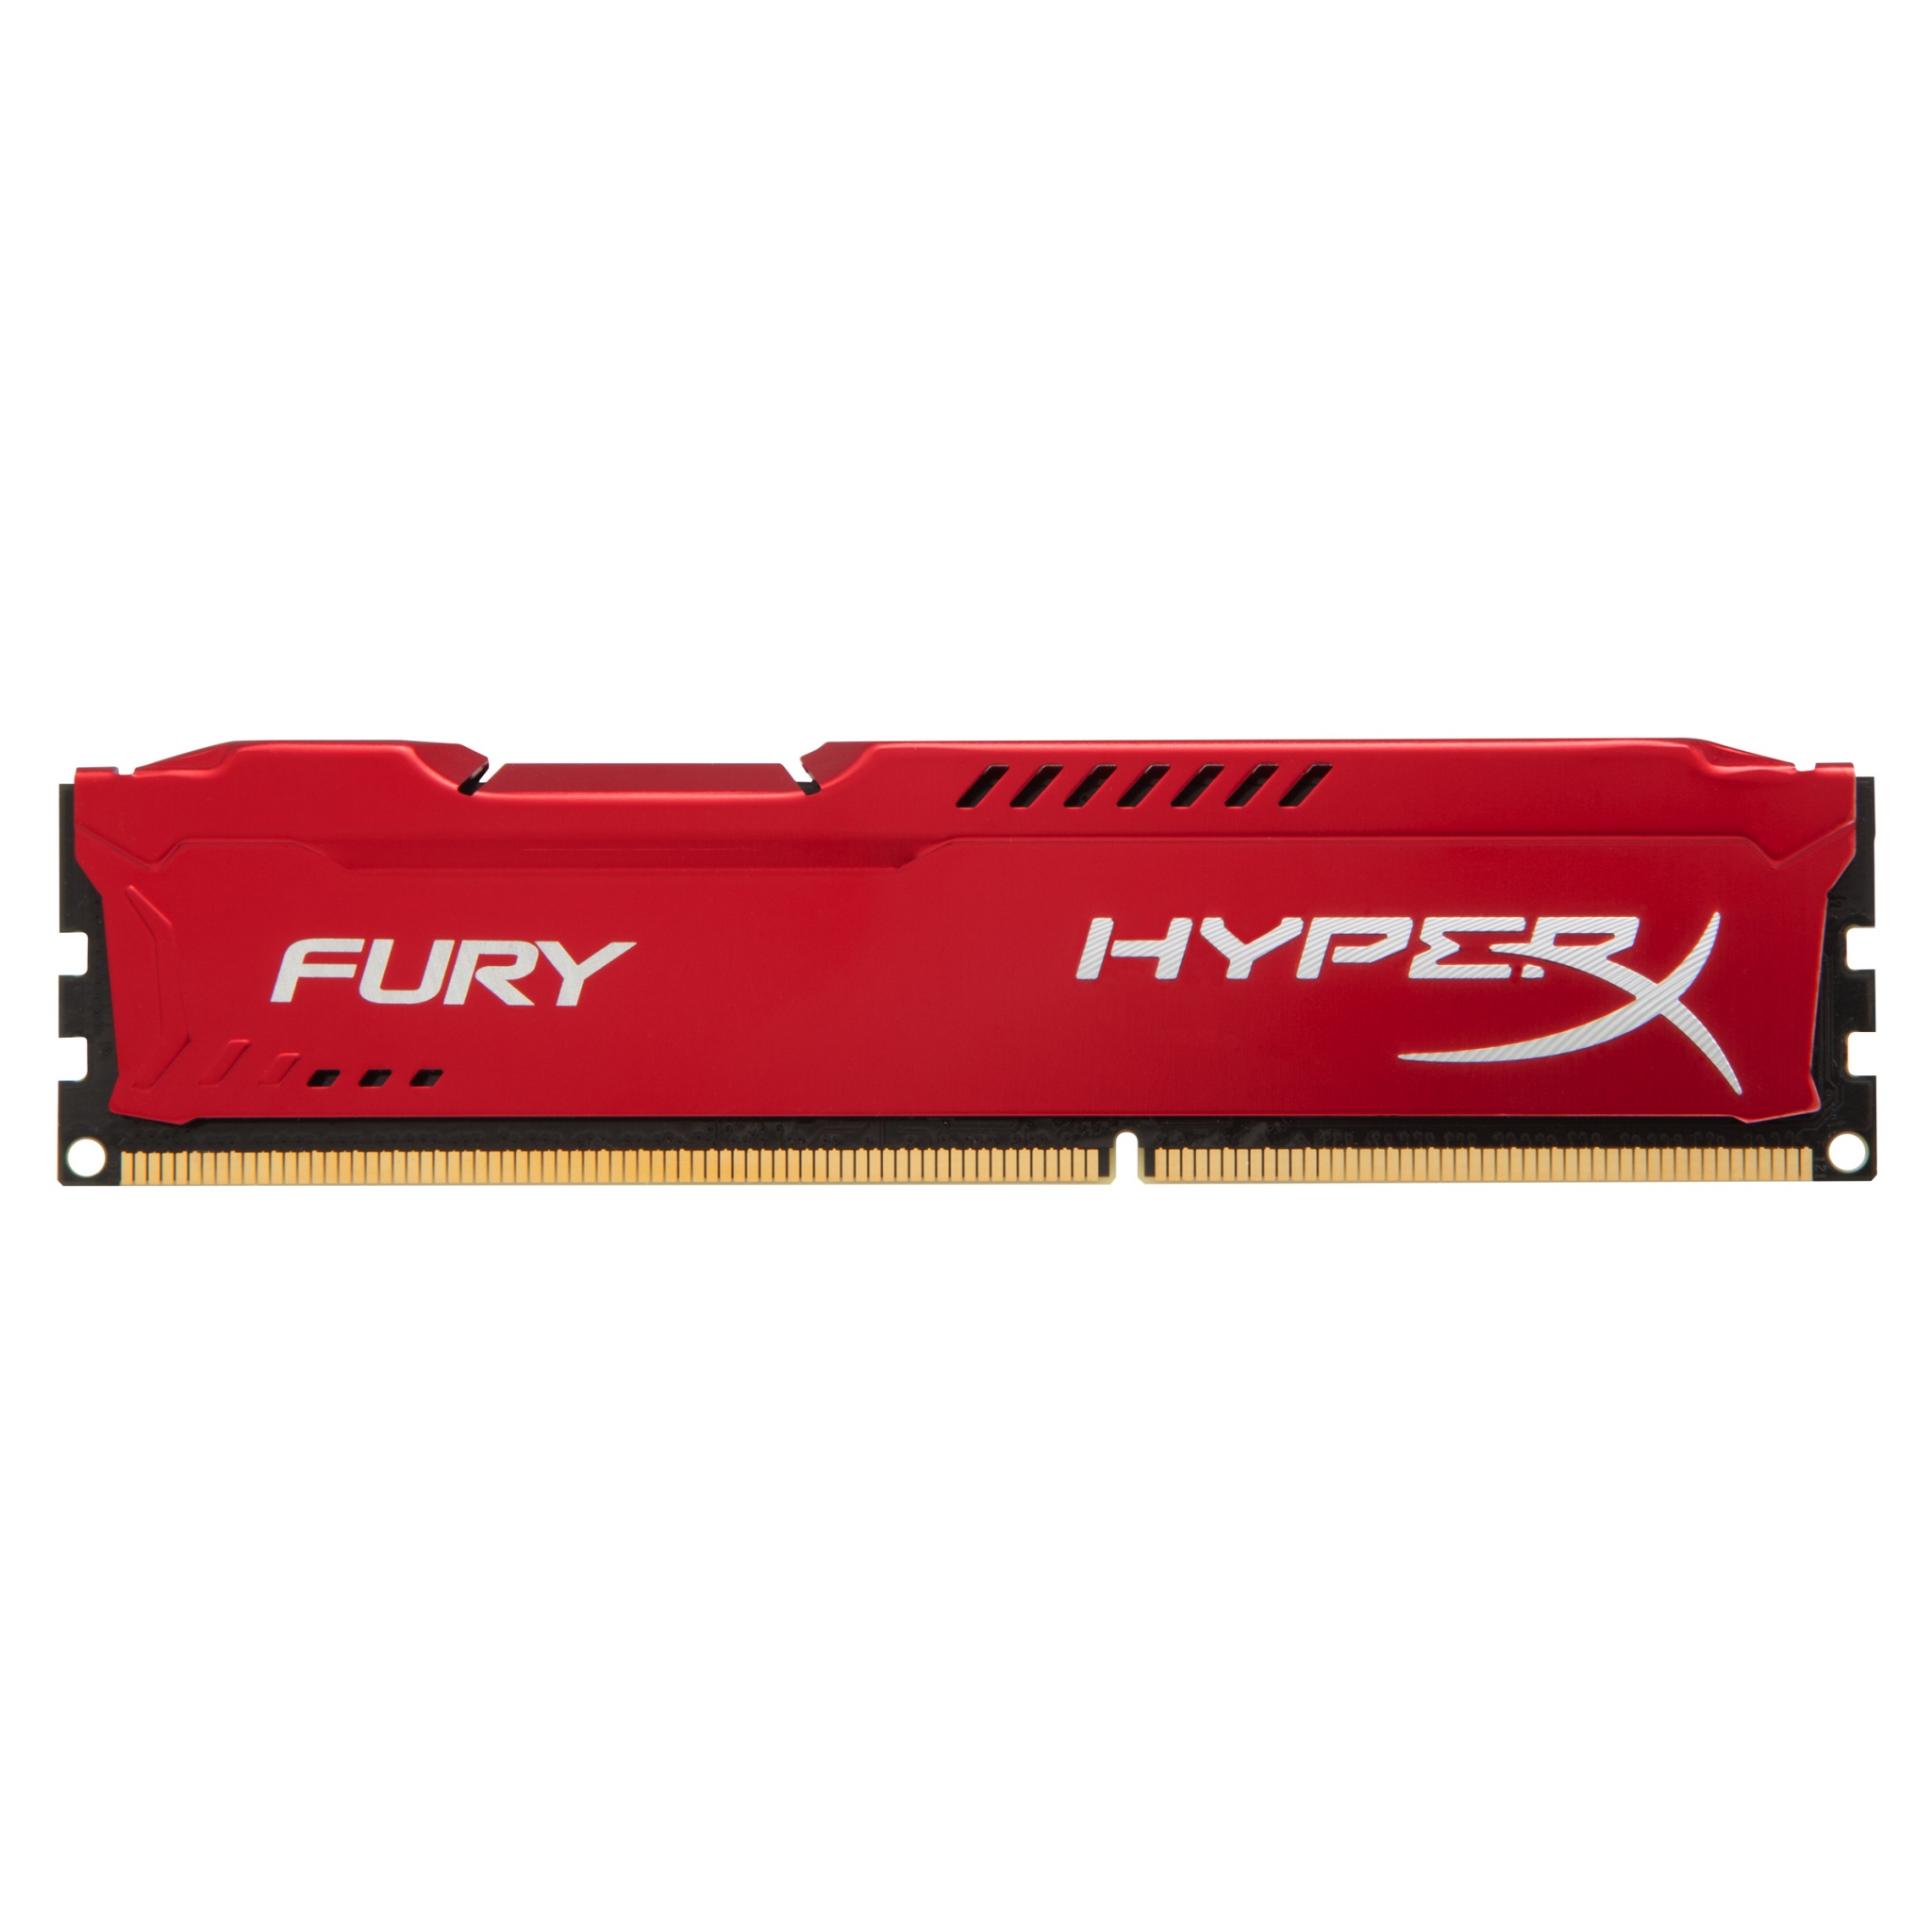 Glossary slipper wrench 8GB Kingston HyperX Fury DDR3 1600MHz CL10 Memory Module Upgrade - Red